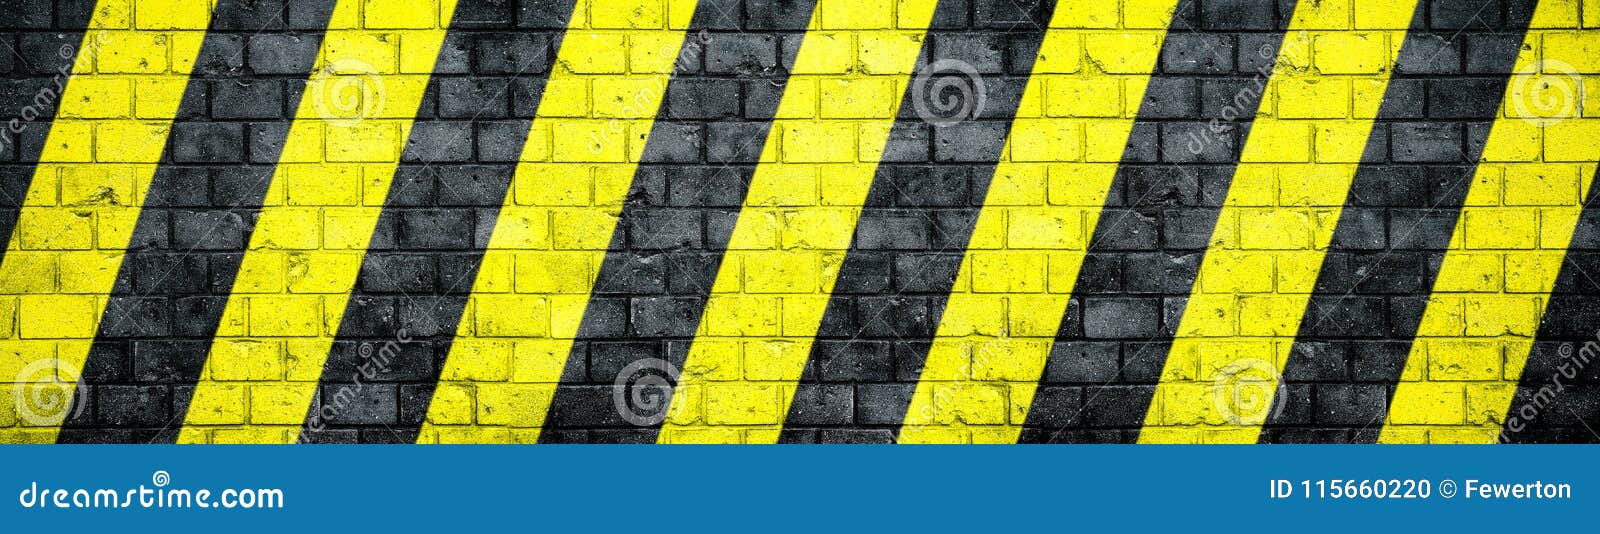 old and weathered grungy brick wall with danger or attention black and yellow warning diagonal stripes texture background banner